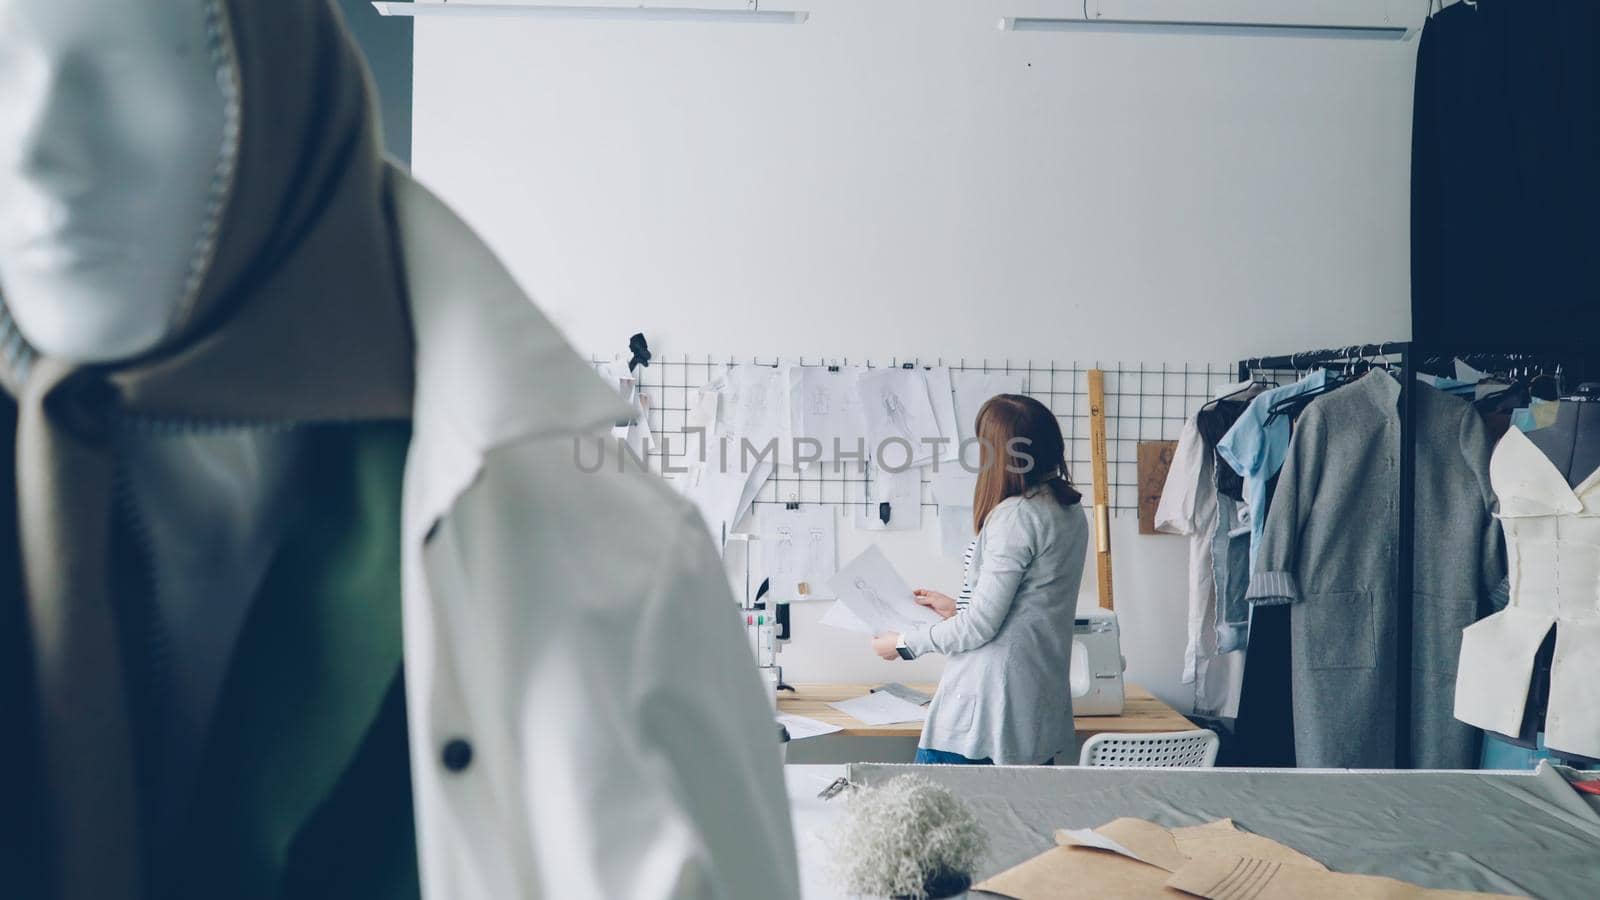 Attractive young woman clothing designer is looking at garment sketches hanging on wall then choosing new drawings. Mannequin dresses in trendy clothes is in foreground.